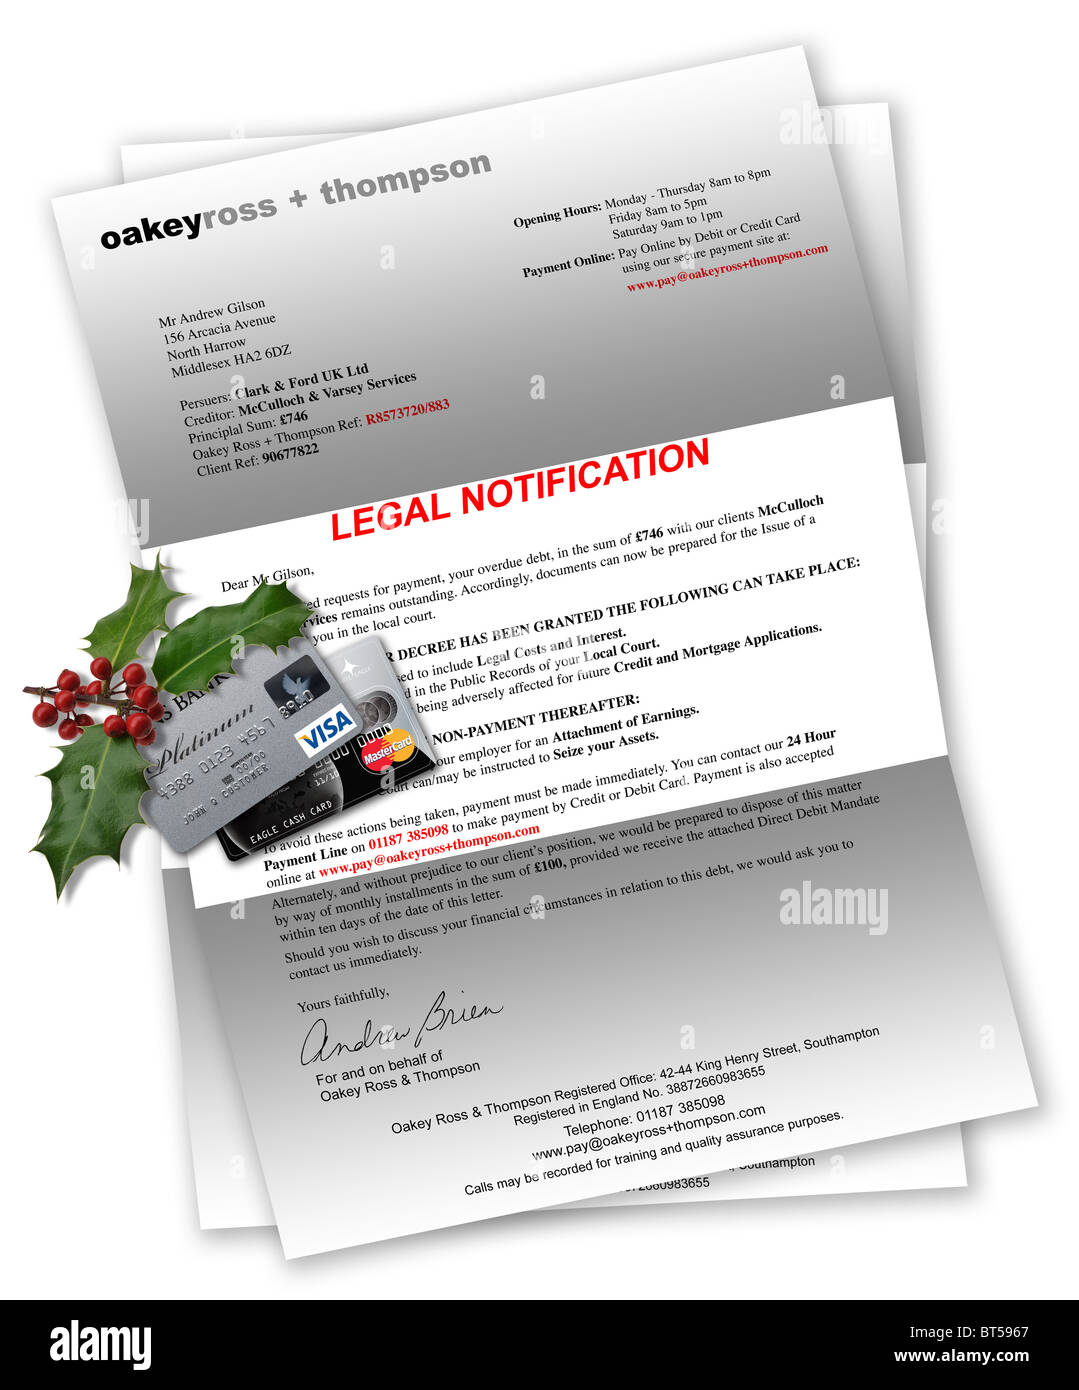 Legal Notification letter with credit cards and Christmas holly on top Stock Photo